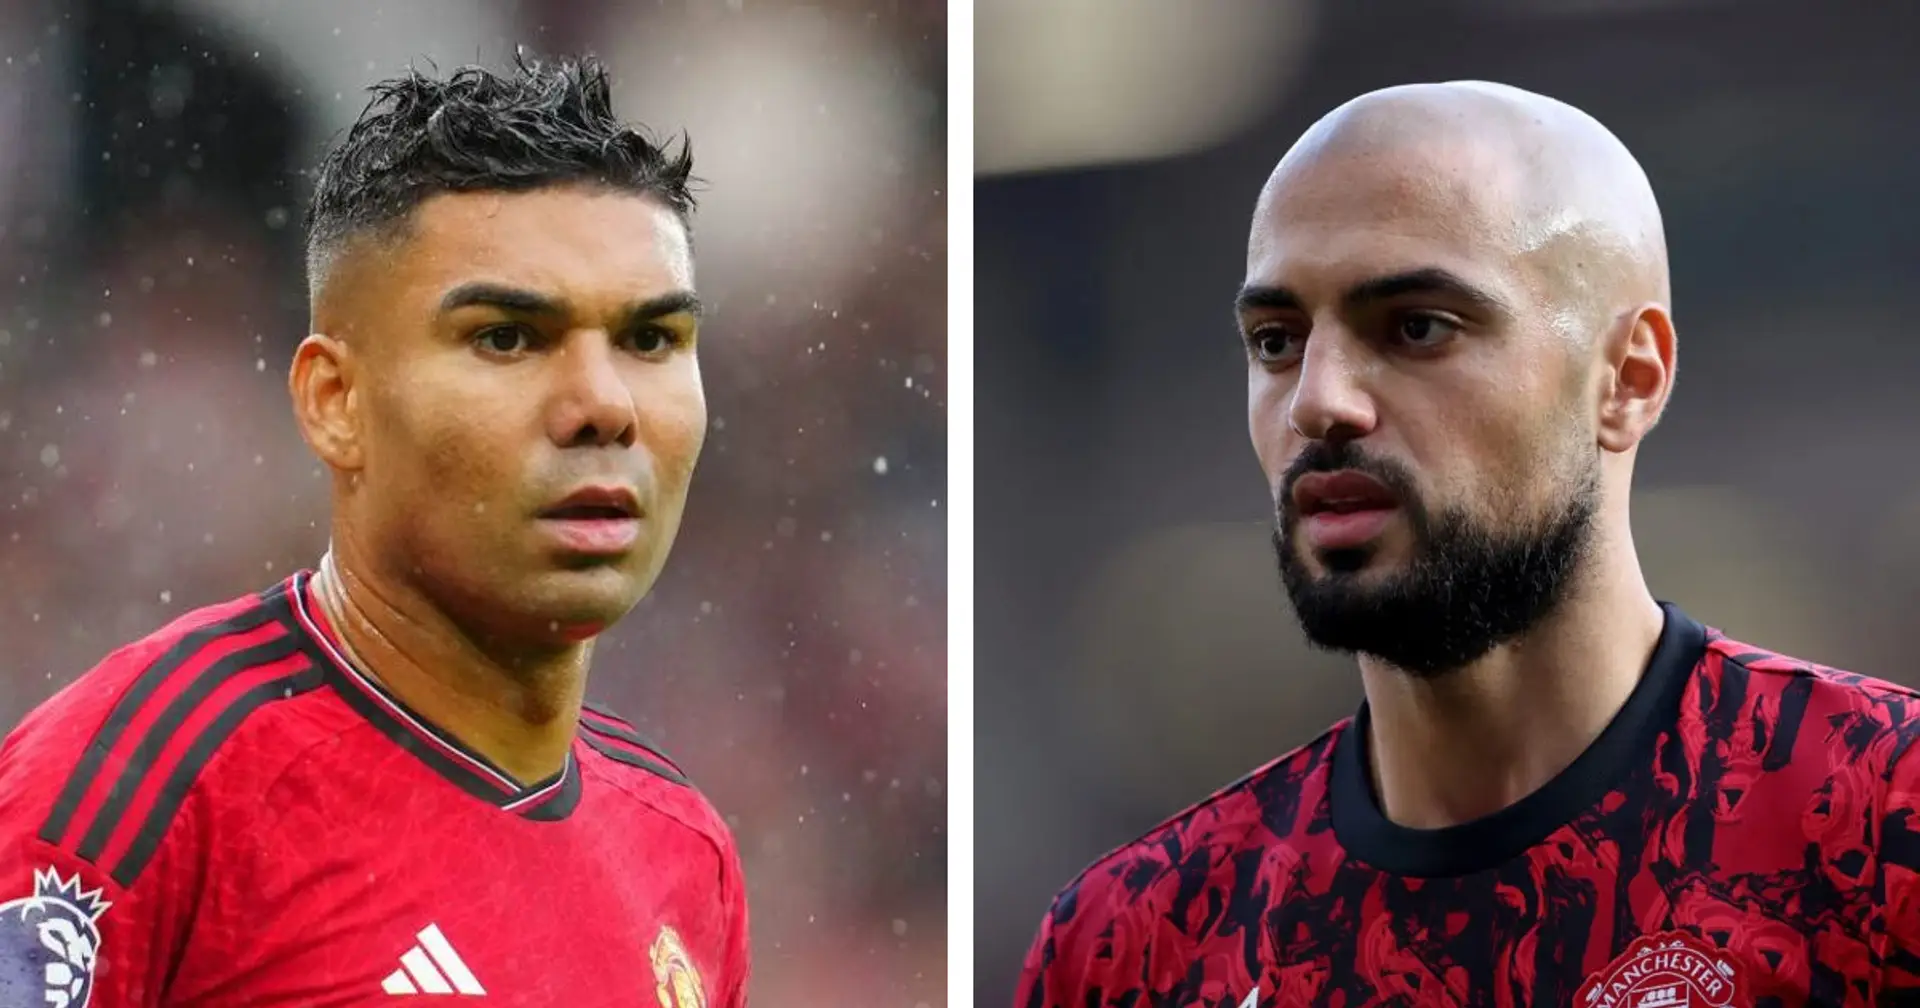 Casemiro out, Amrabat and Reguilon in: early team news for Man United vs Sheffield Utd